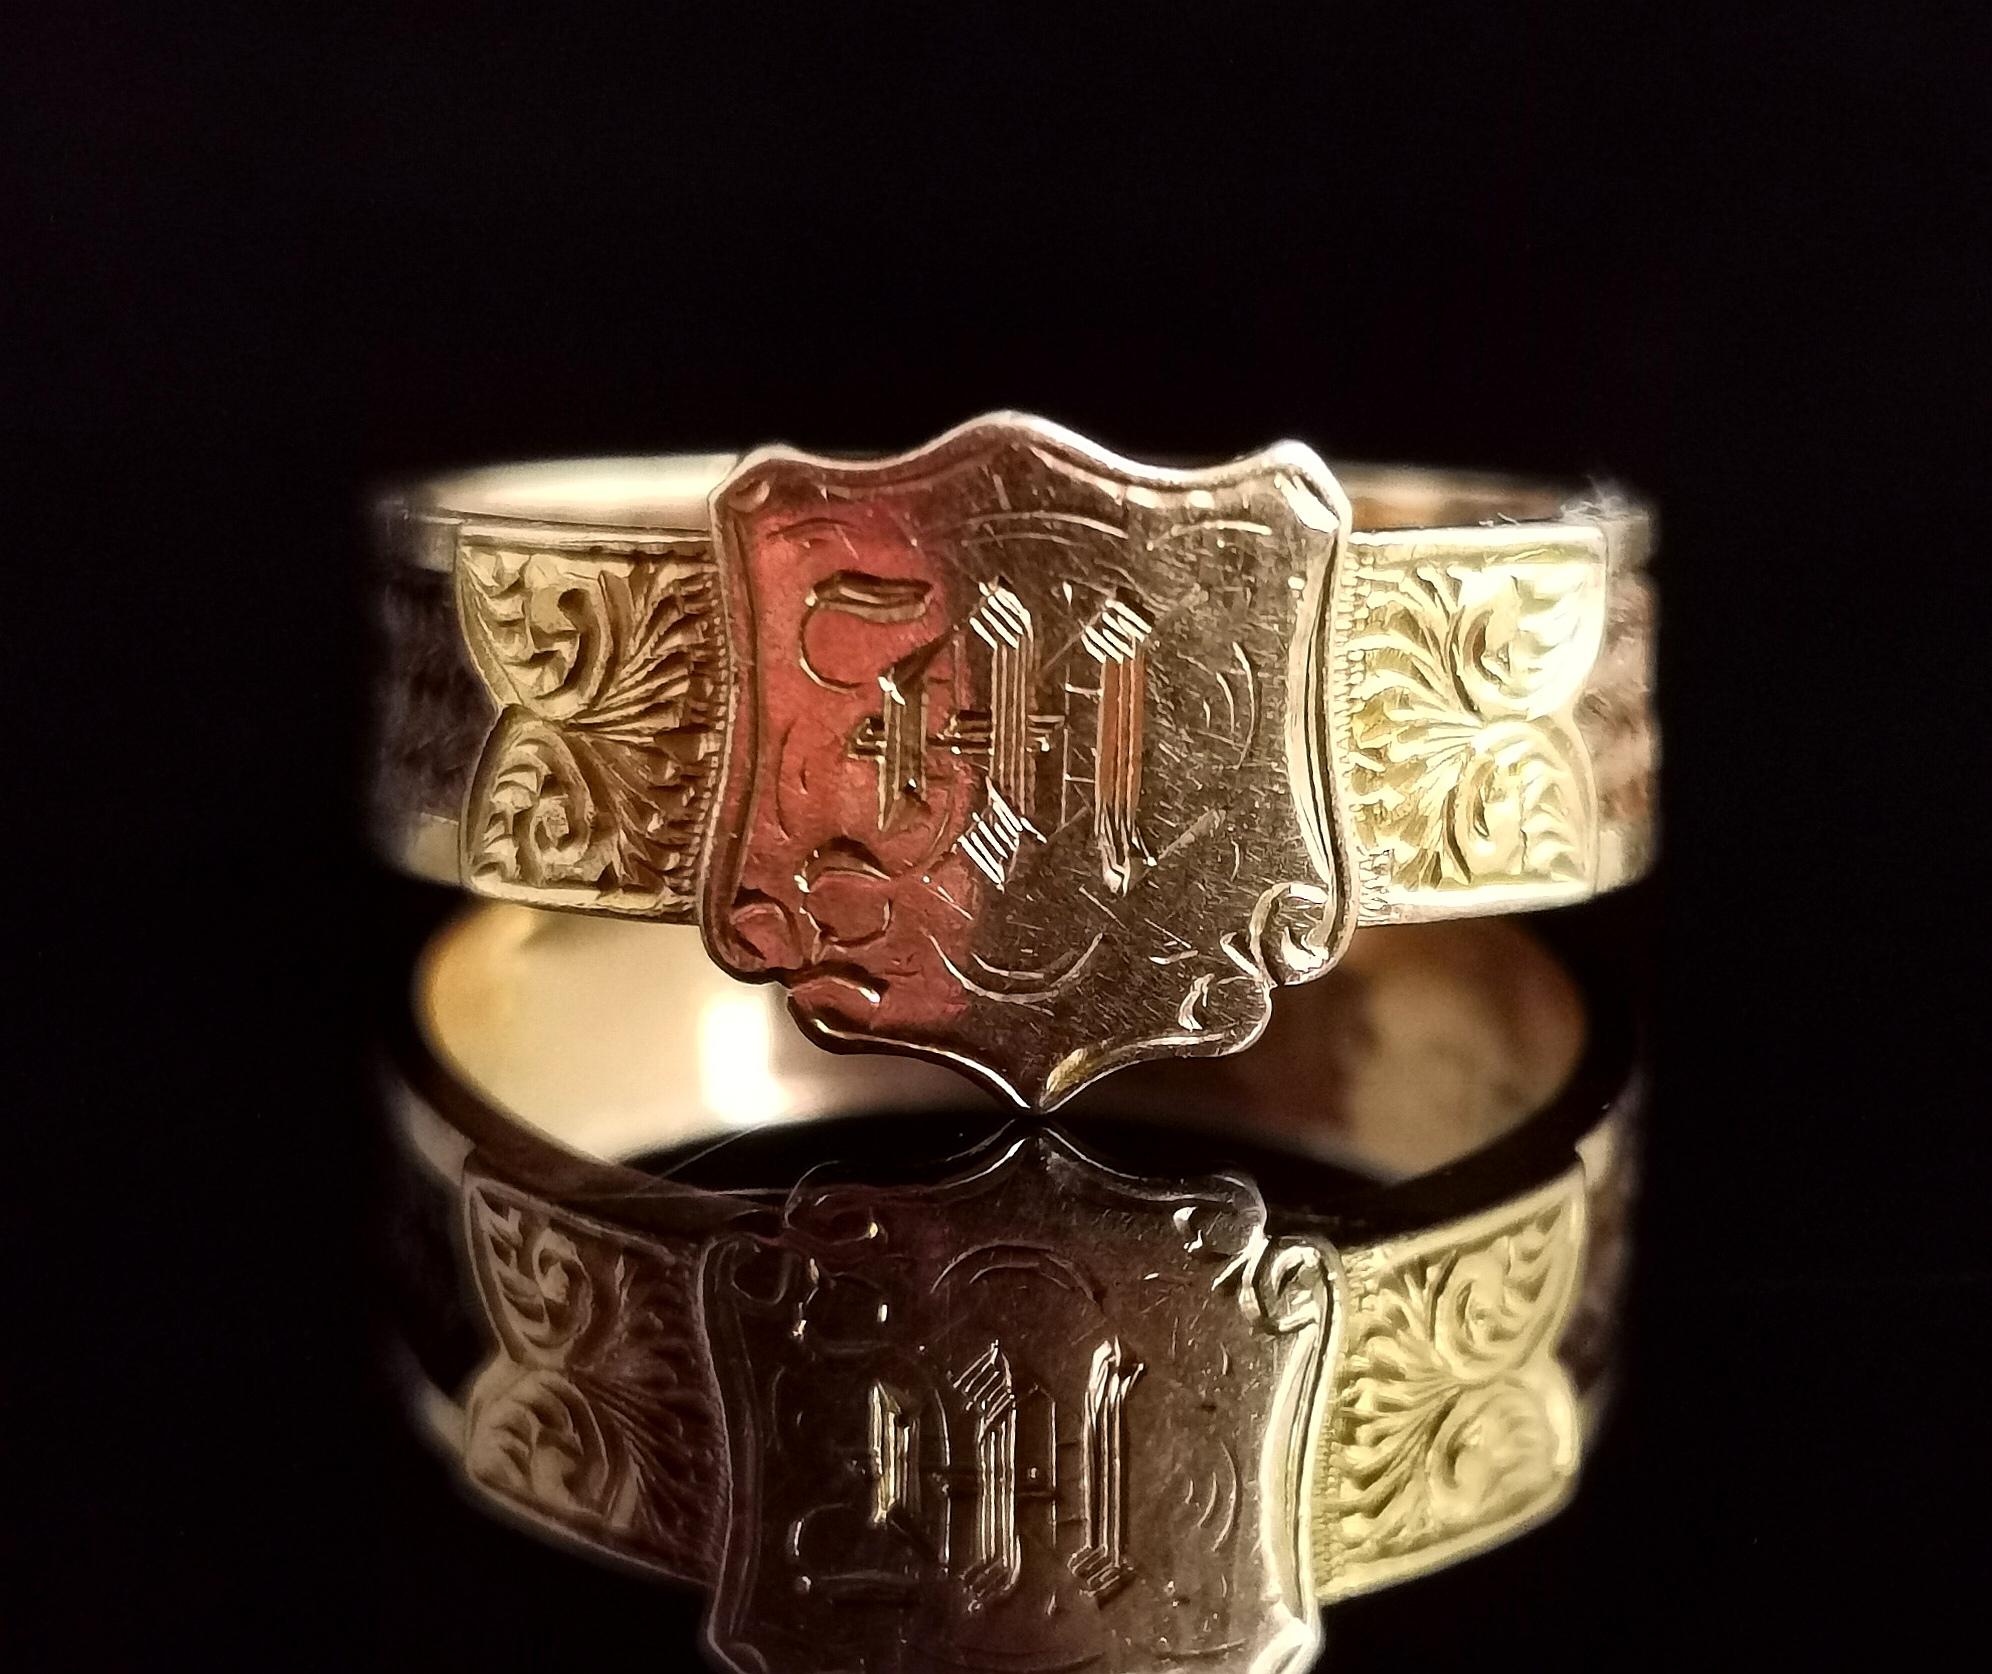 A handsome antique Victorian mourning ring.

Rich 18kt yellow gold with a central shield shaped cartouche with the letter M engraved in fancy script.

The gold band has finely woven brown hair running through the centre with engraved gold sections